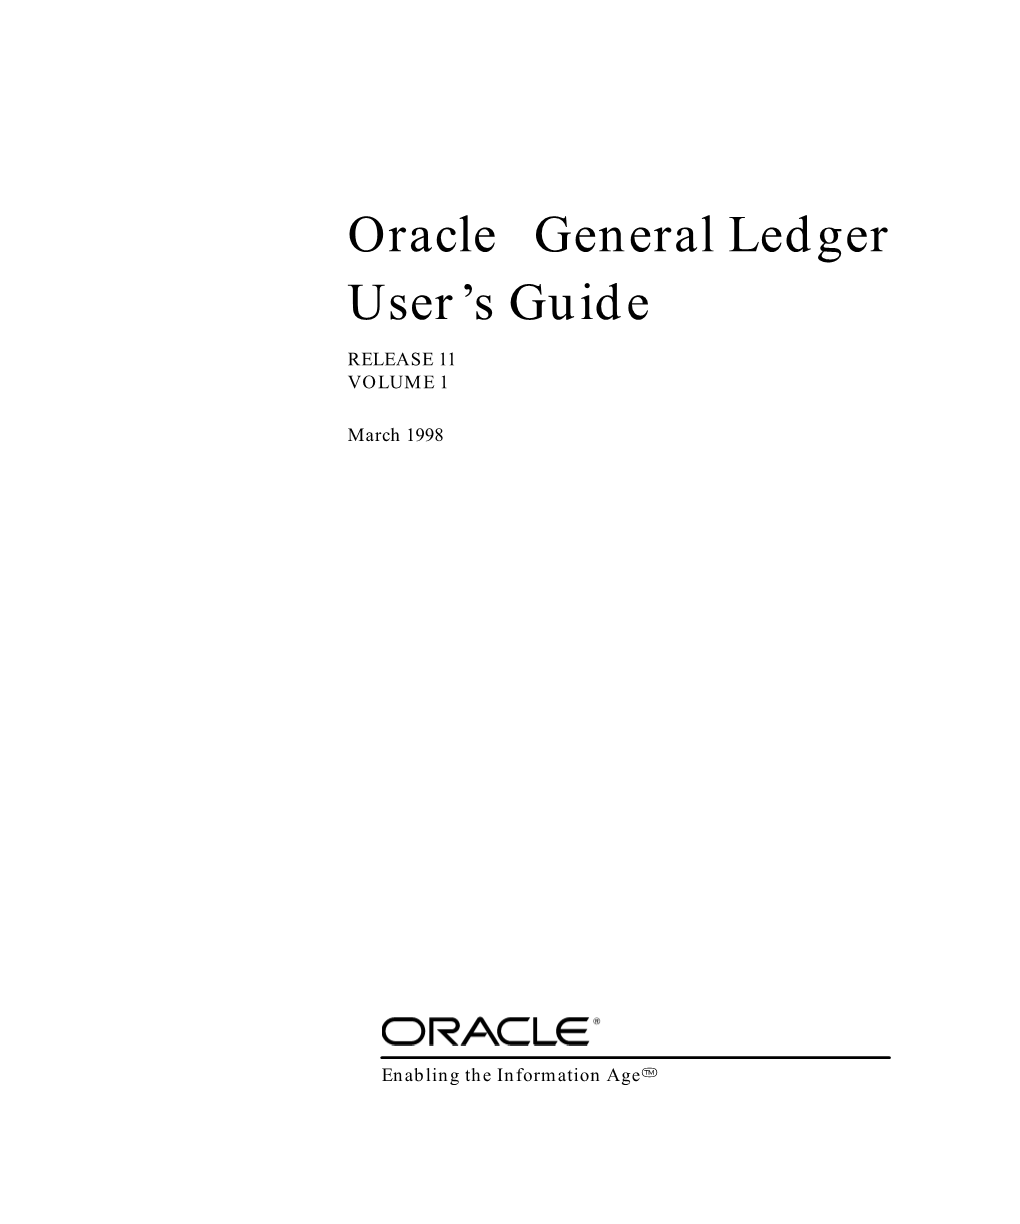 Oracle General Ledger User's Guide Release 11